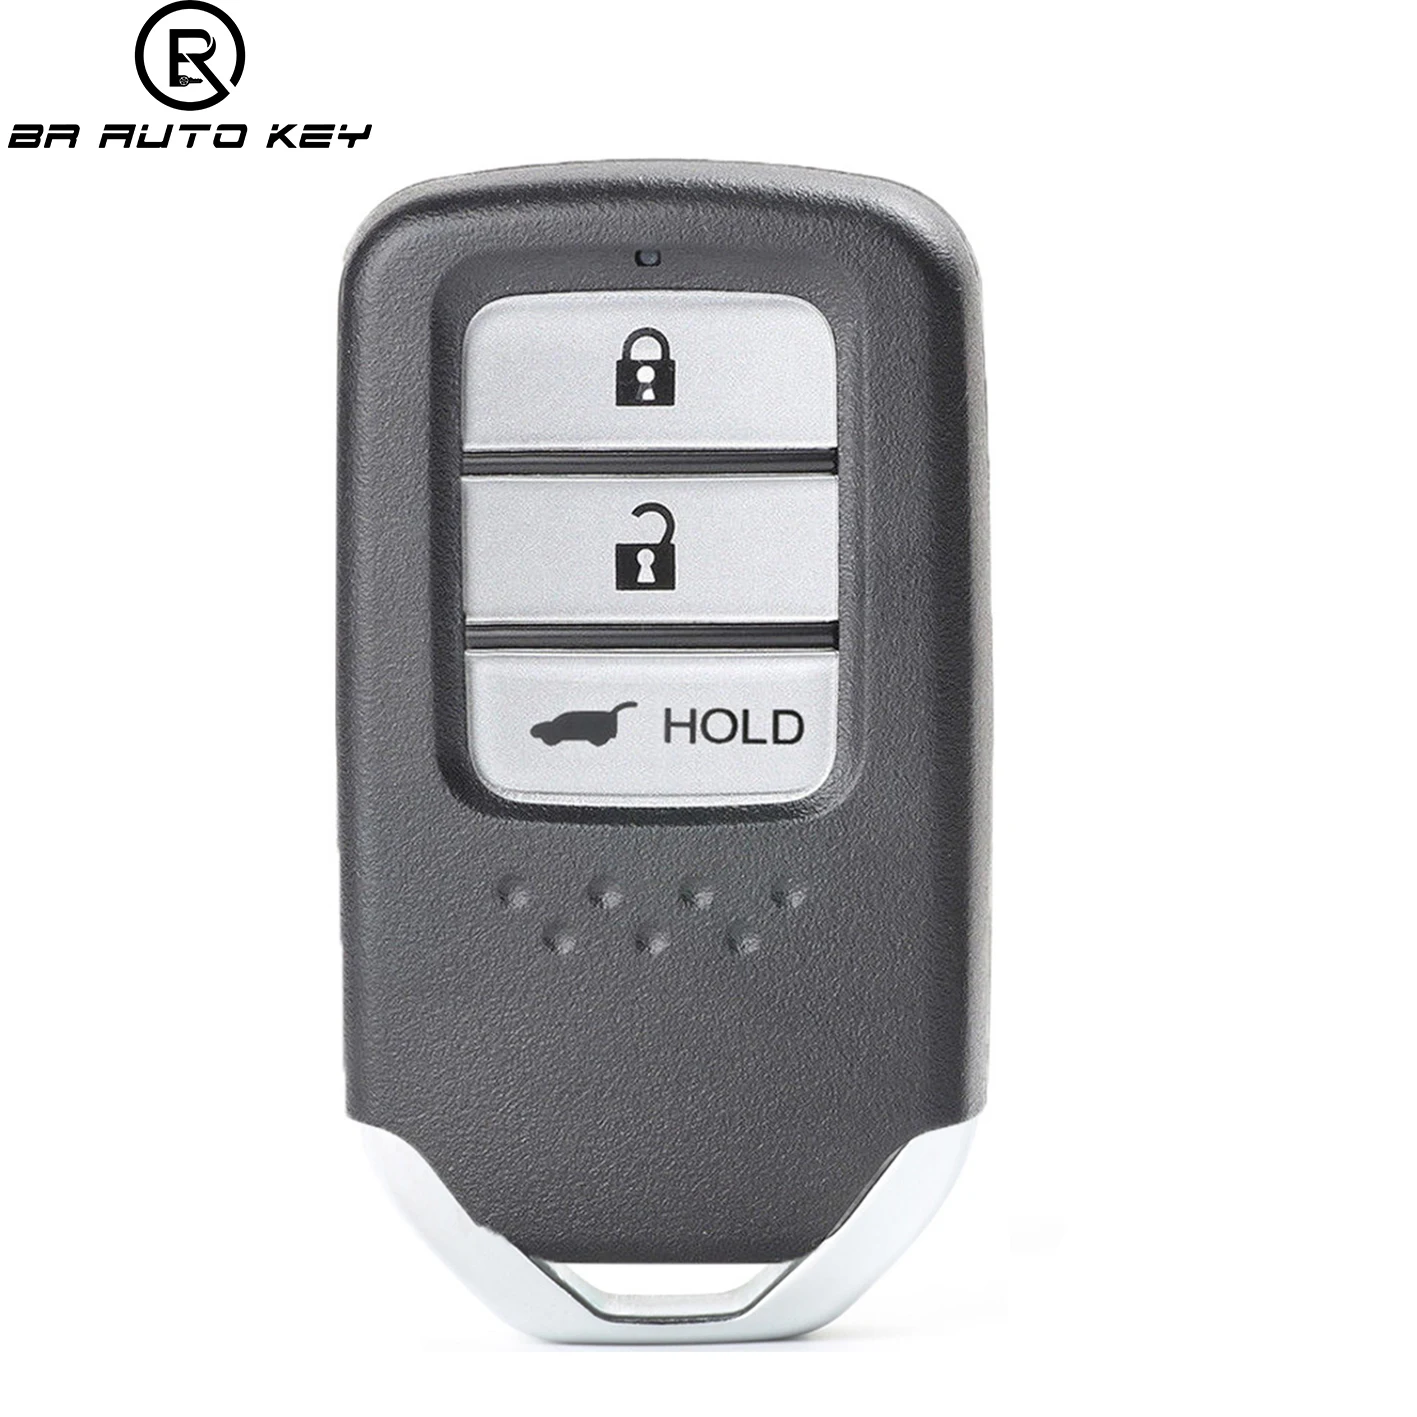 Keyless Go Smart Remote Car key Fob For Honda C-RV 2017 2018 2019 433mhz id47 Chip With Trunk Hold Buttons 72147-TLA keyless go remote key fob for honda h rv jazz shuttle vezel 2014 2018 remote 2 button fcc kr5v1x 72147 t5a g01 433mhz id47chip